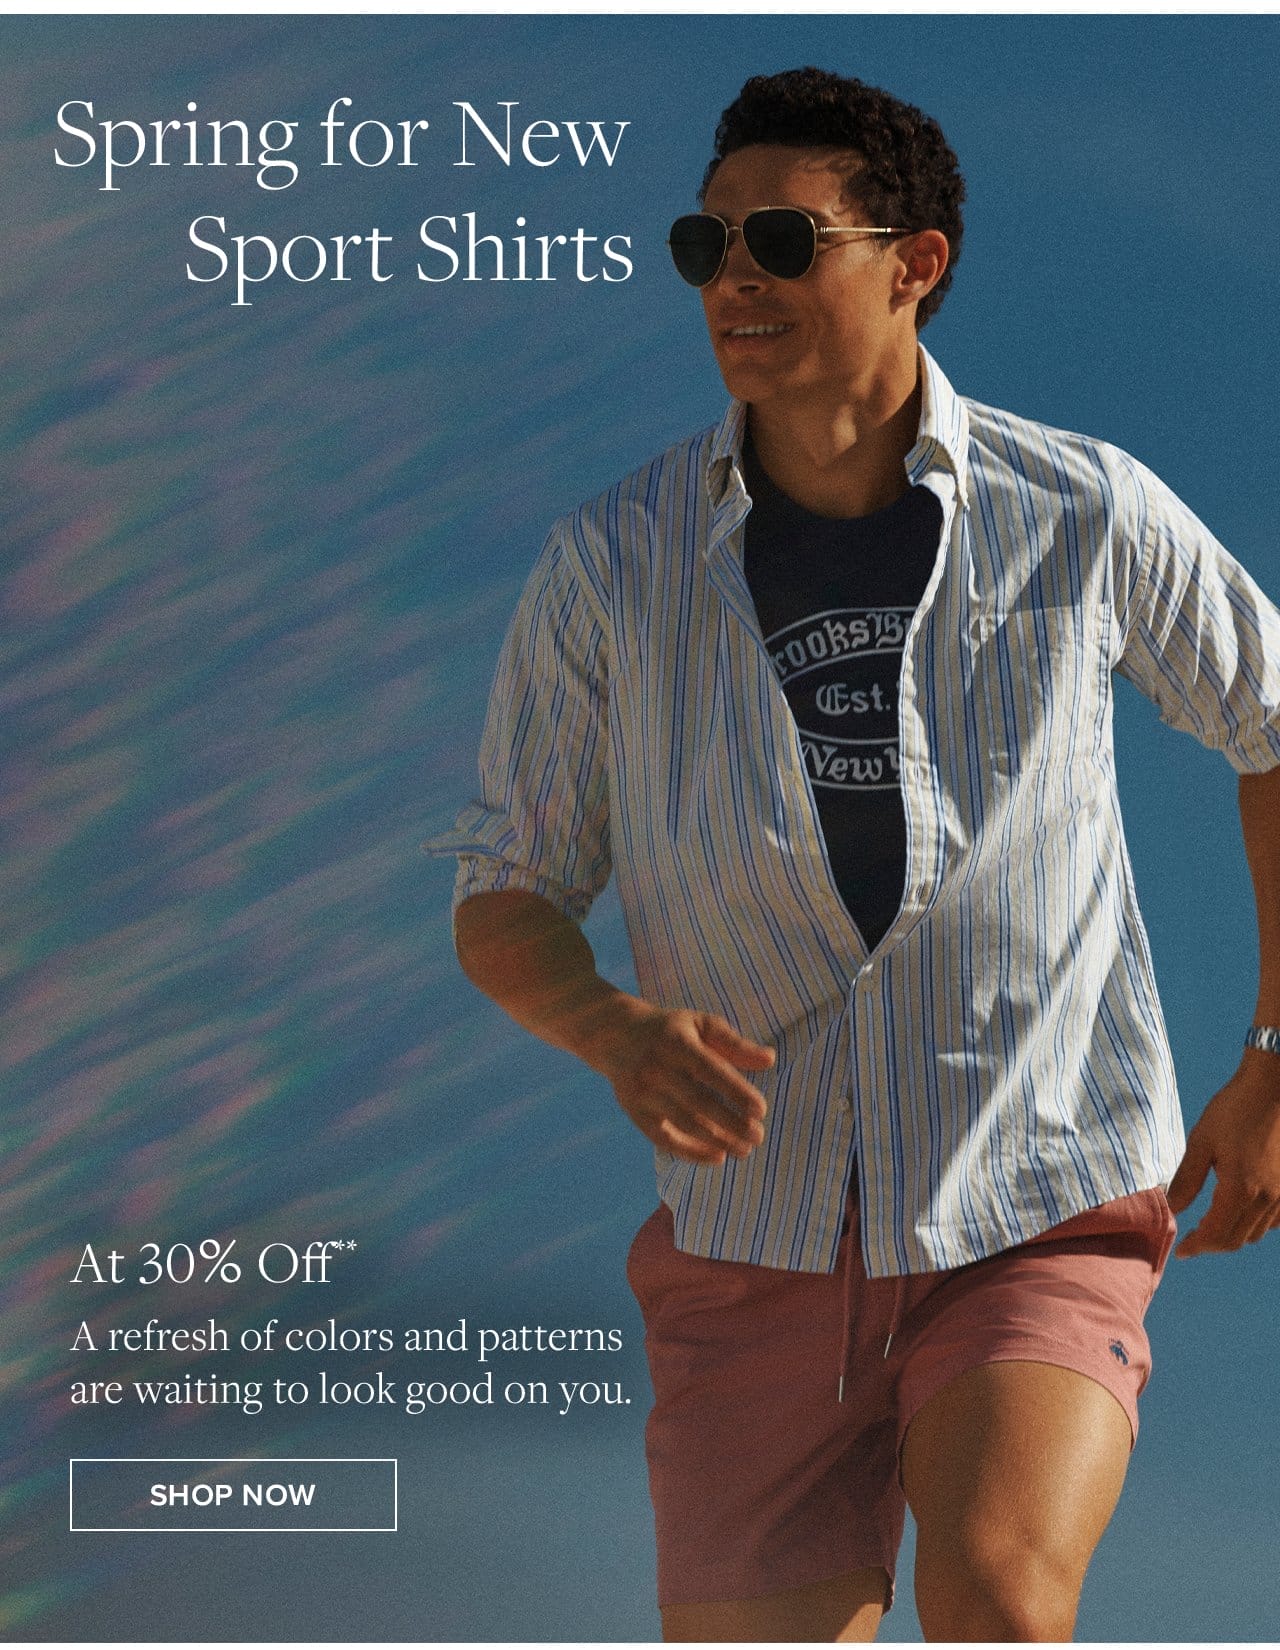 Spirng for New Sport Shirts At 30% Off A refresh of colors and patterns are waiting to look good on you. Shop Now